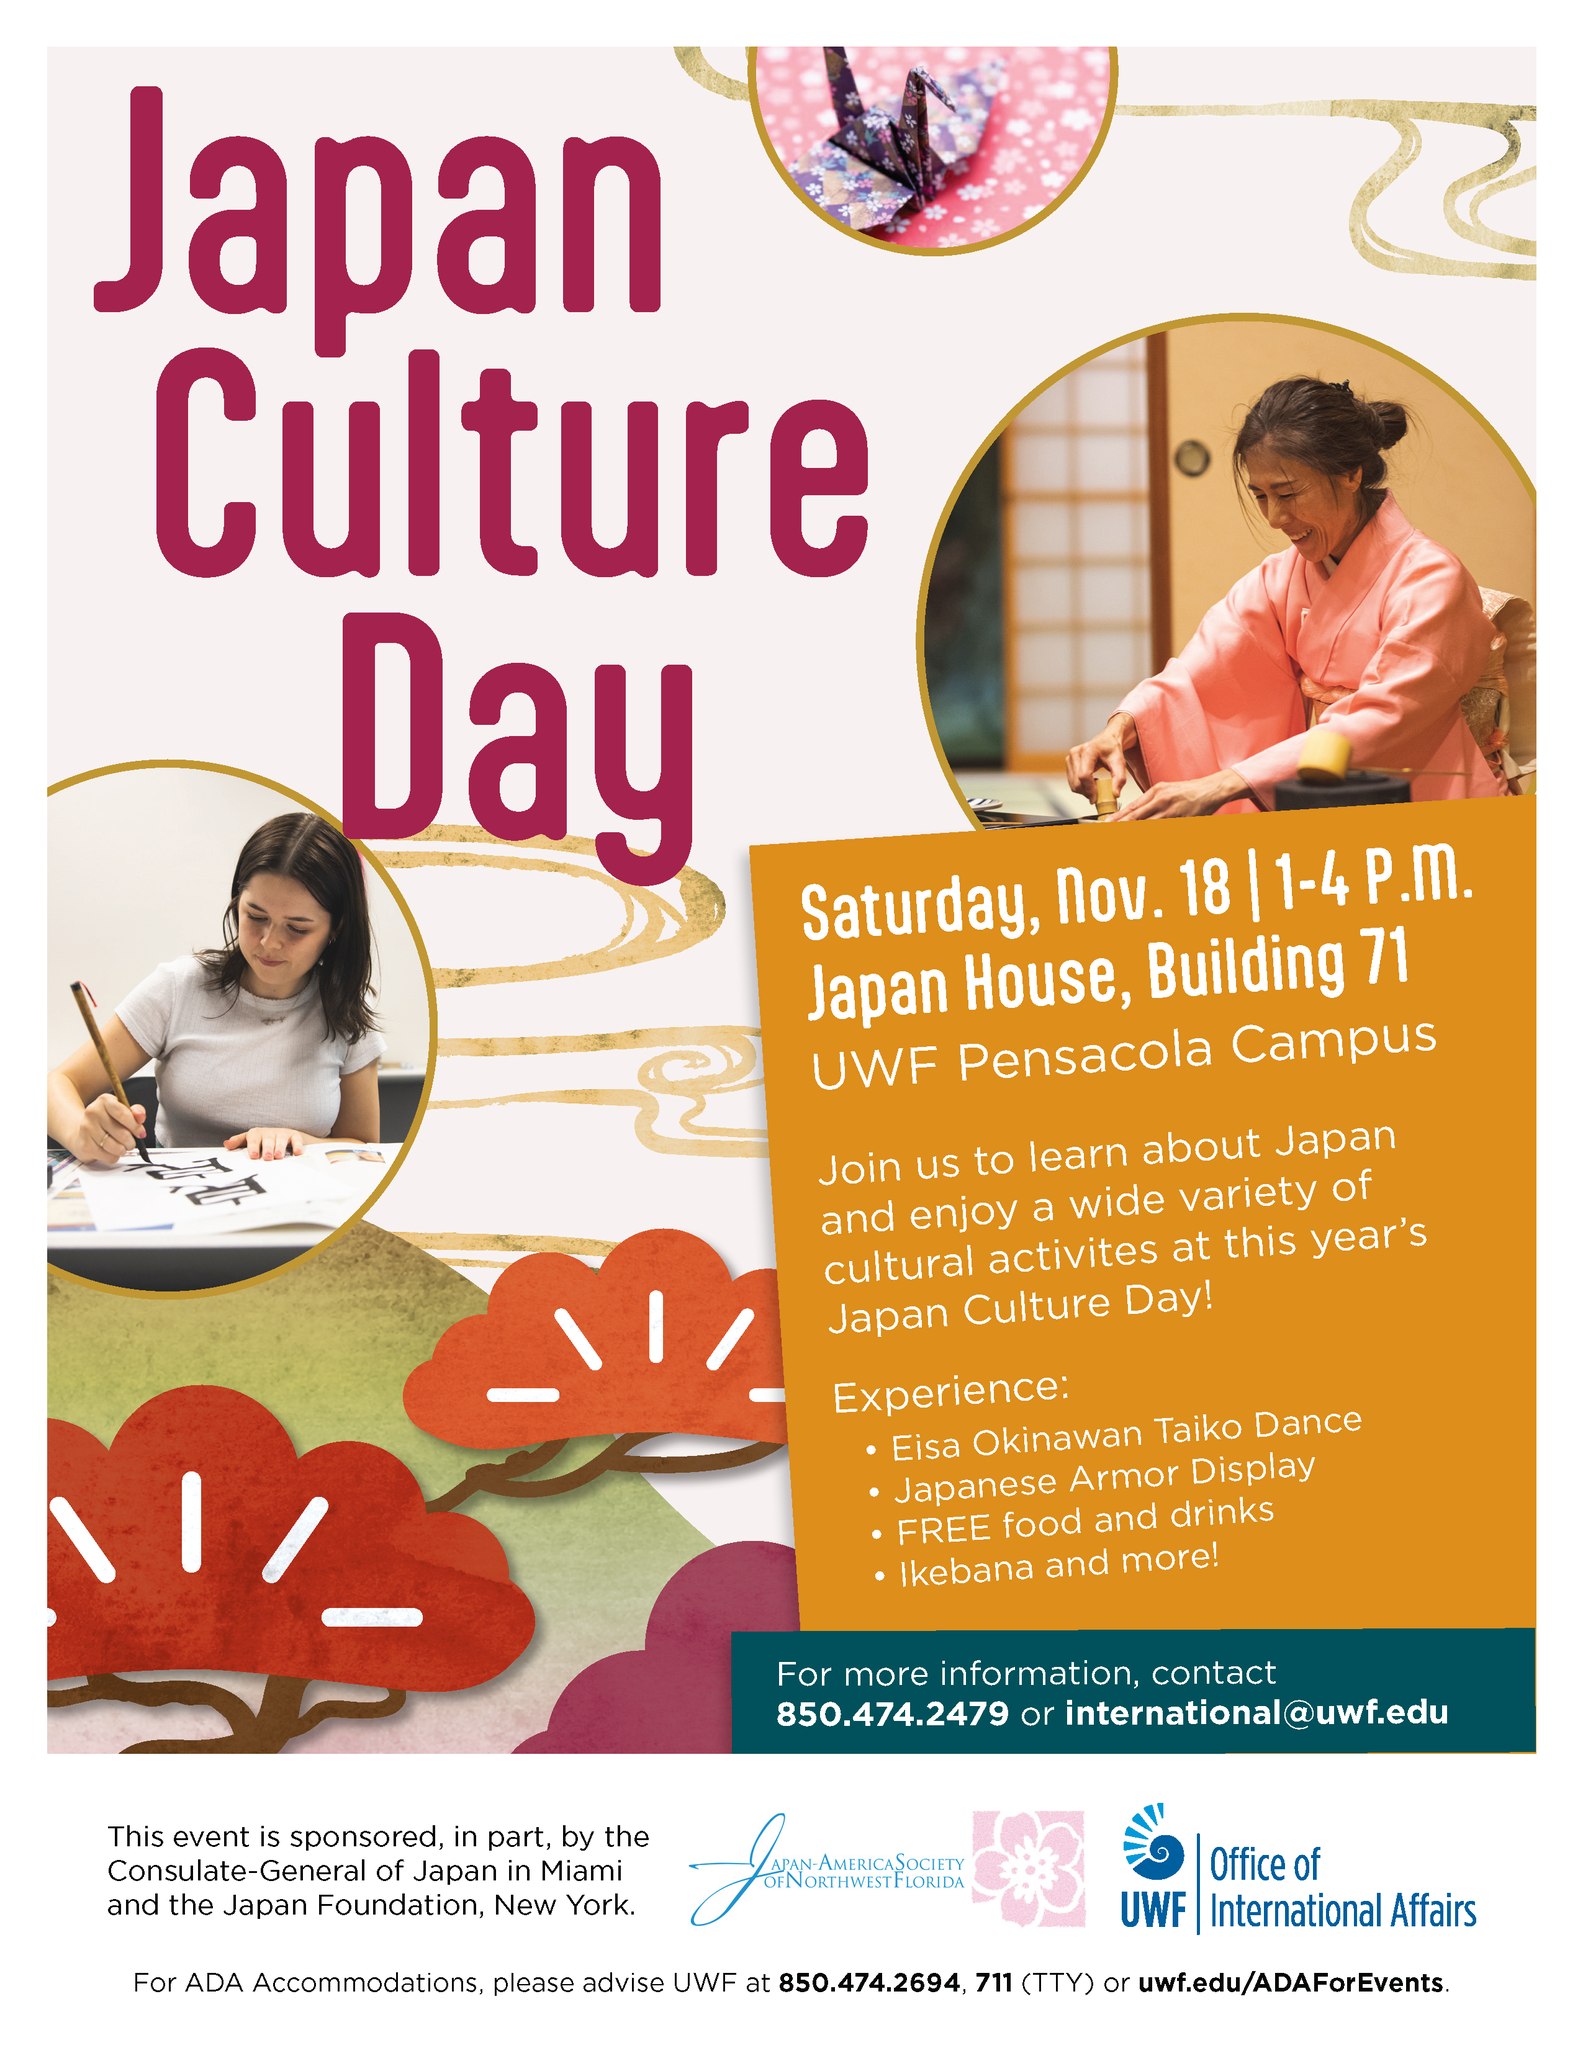 Japan Culture Day